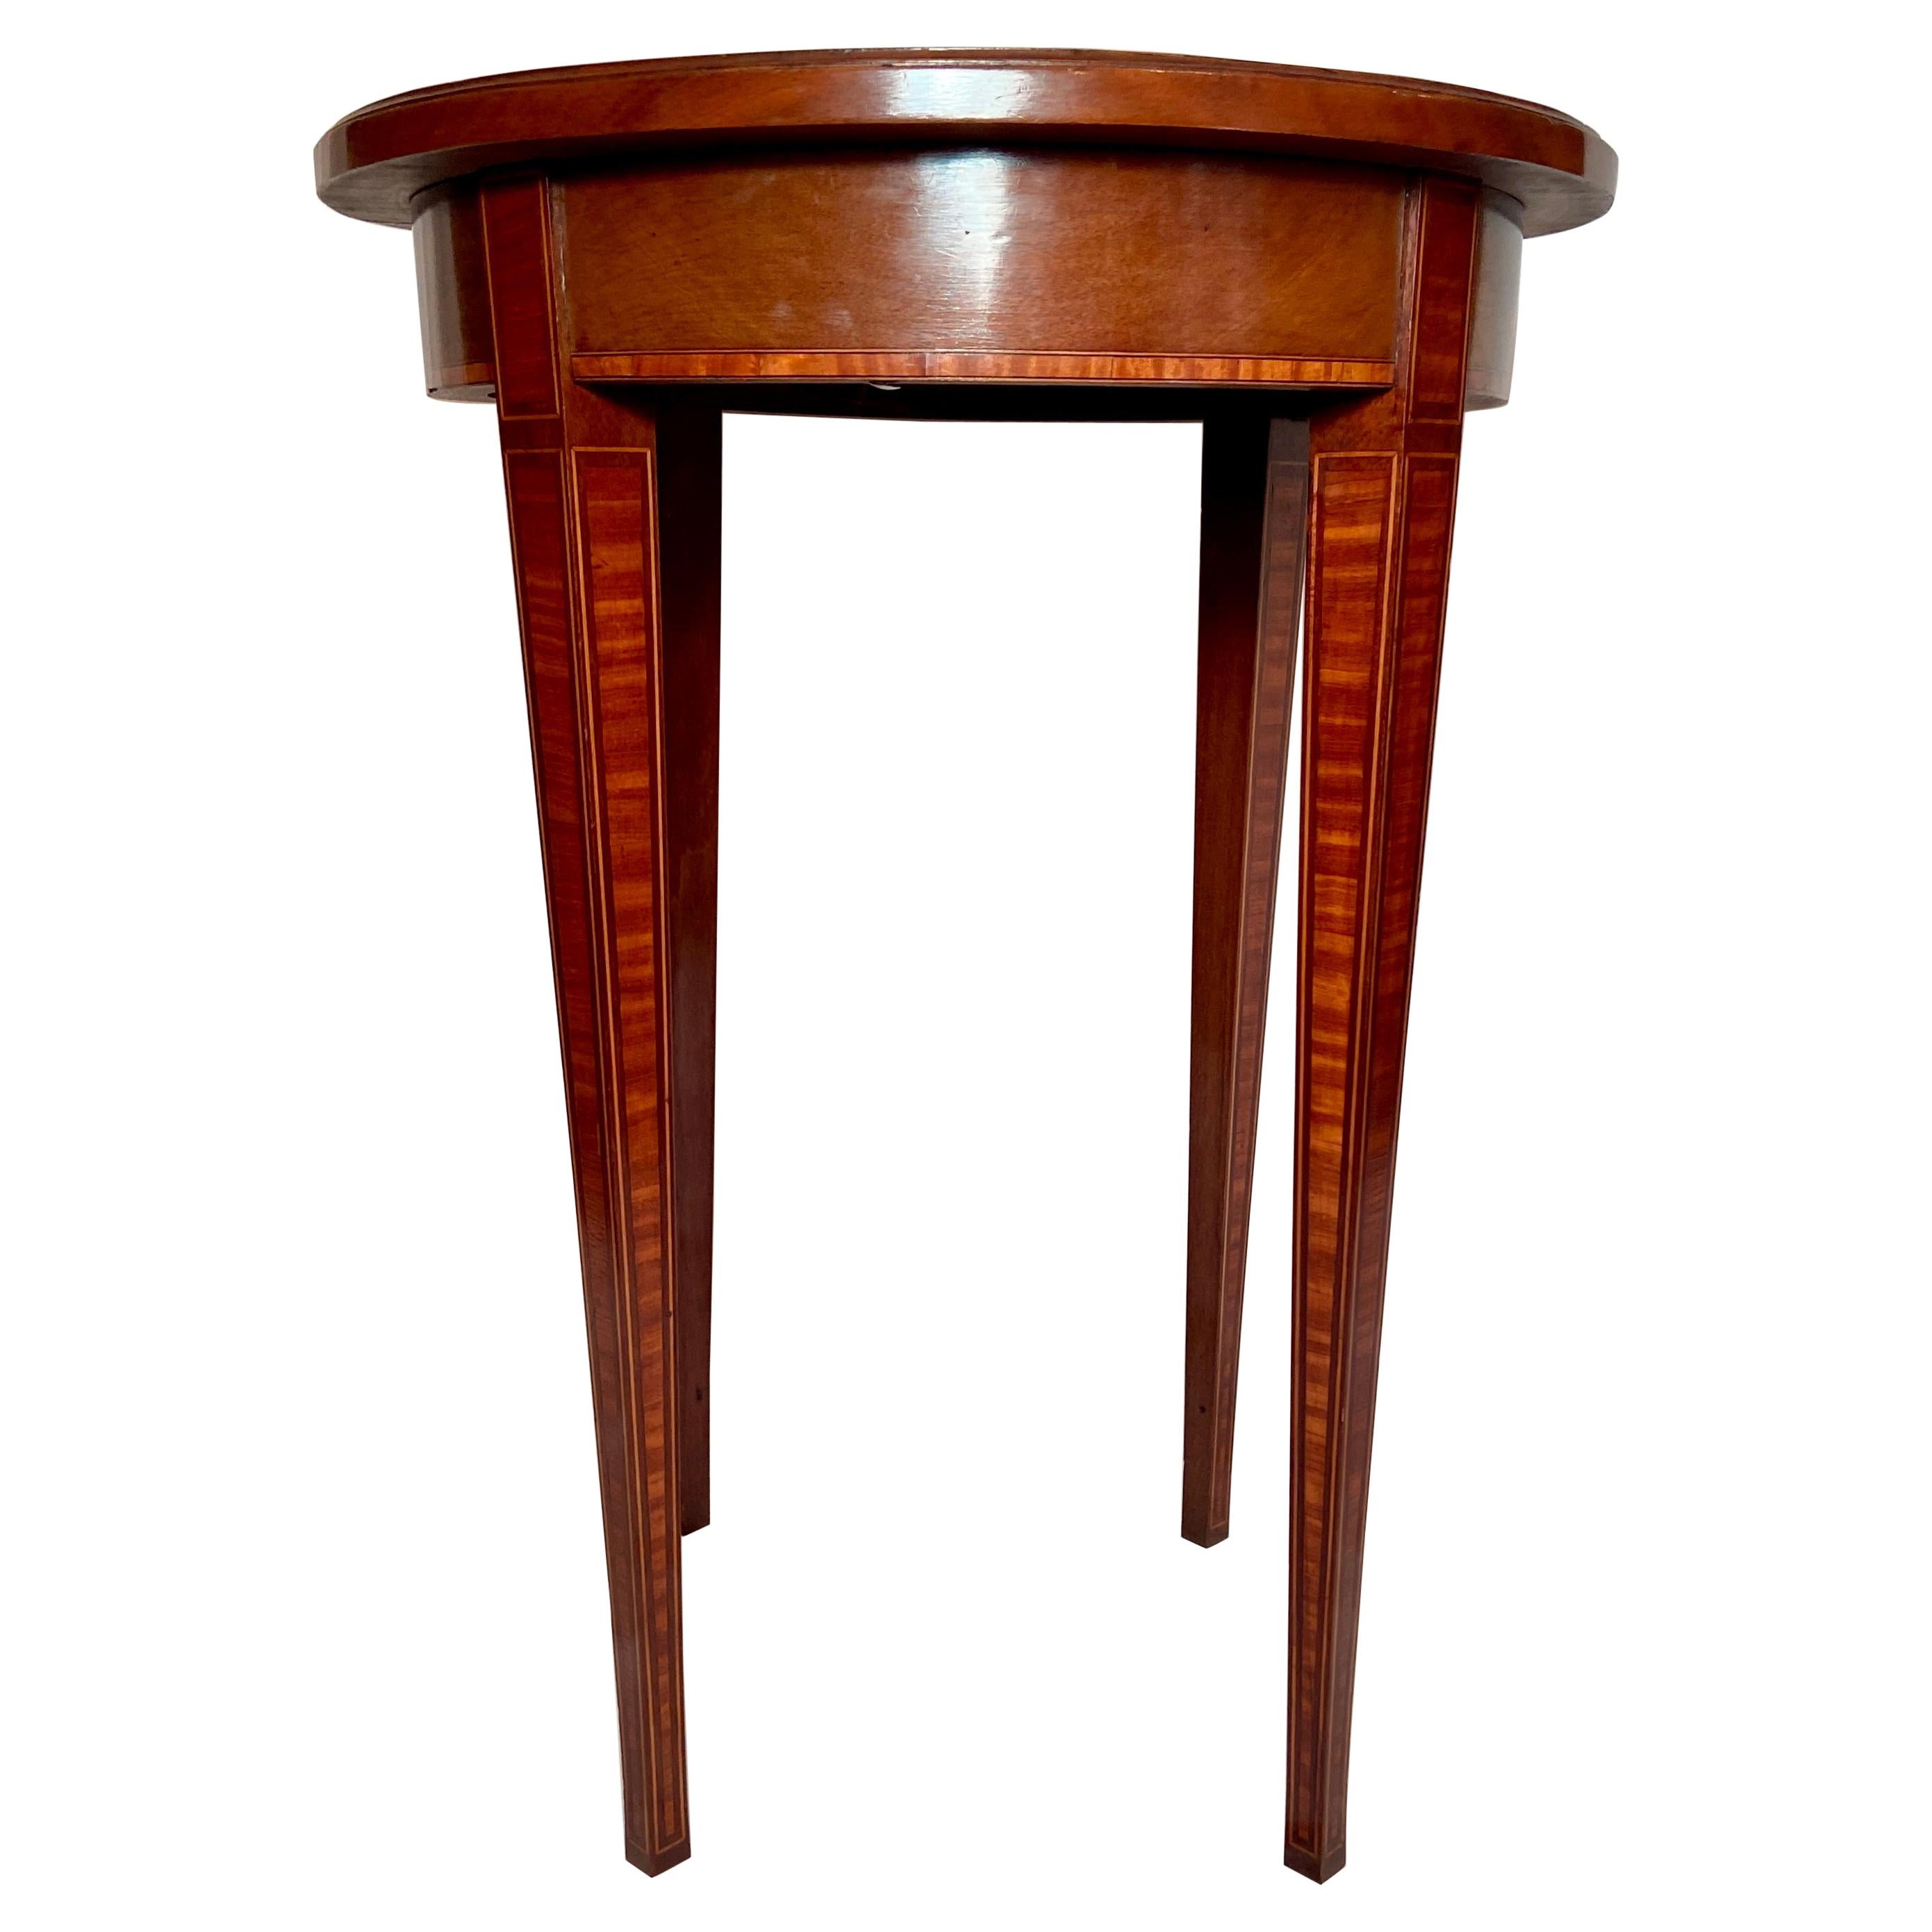 Antique English Mahogany Table with Satinwood Inlay, Circa 1880-1890 For Sale